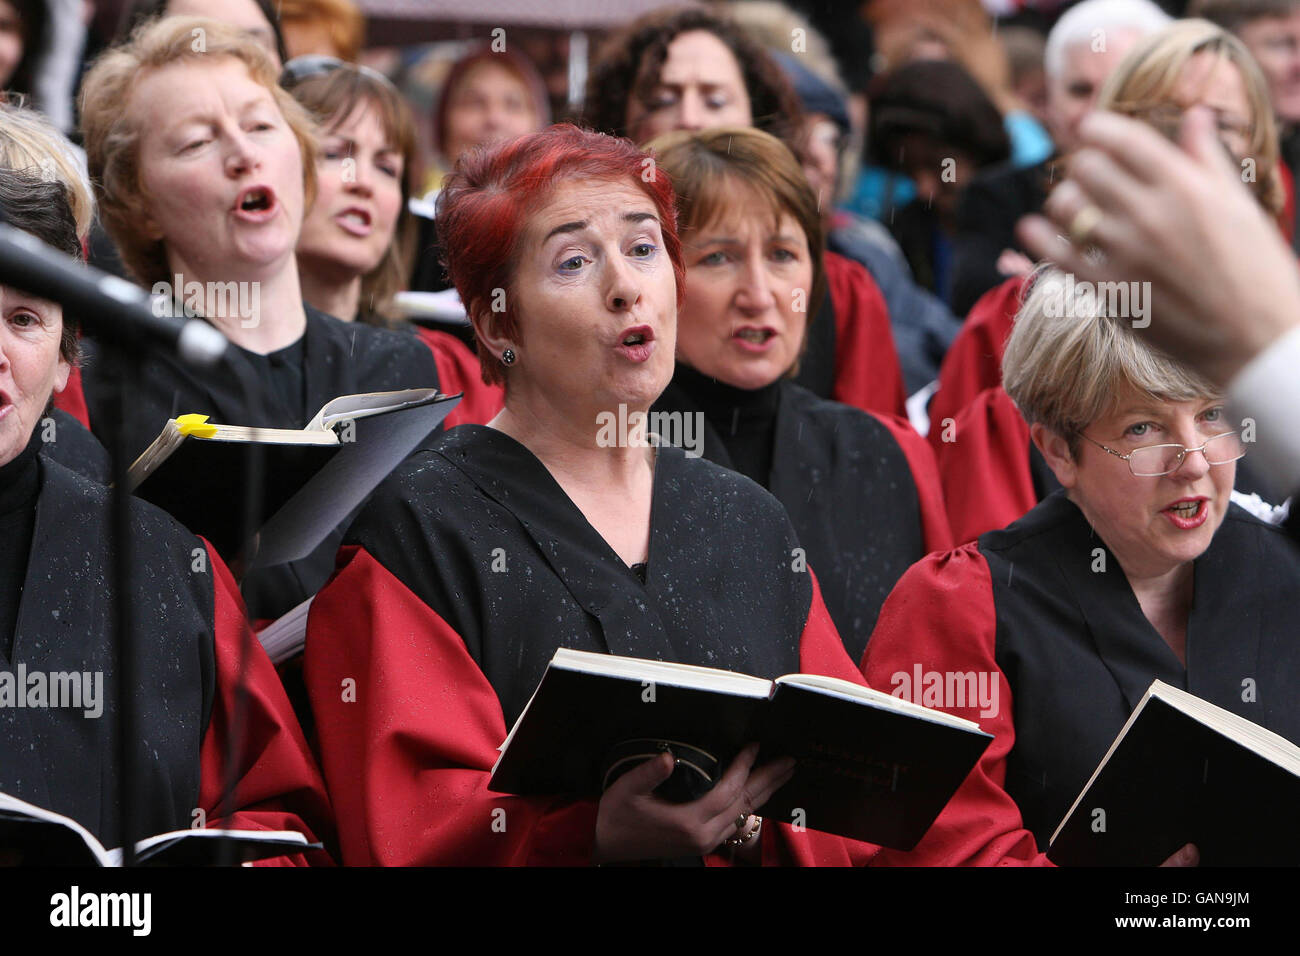 The members of Our Lady's Choral Society perform their anniversary rendition of Handel's Messiah on the exact spot in Dublin's Temple Bar district where it was first performed in 1742. Stock Photo